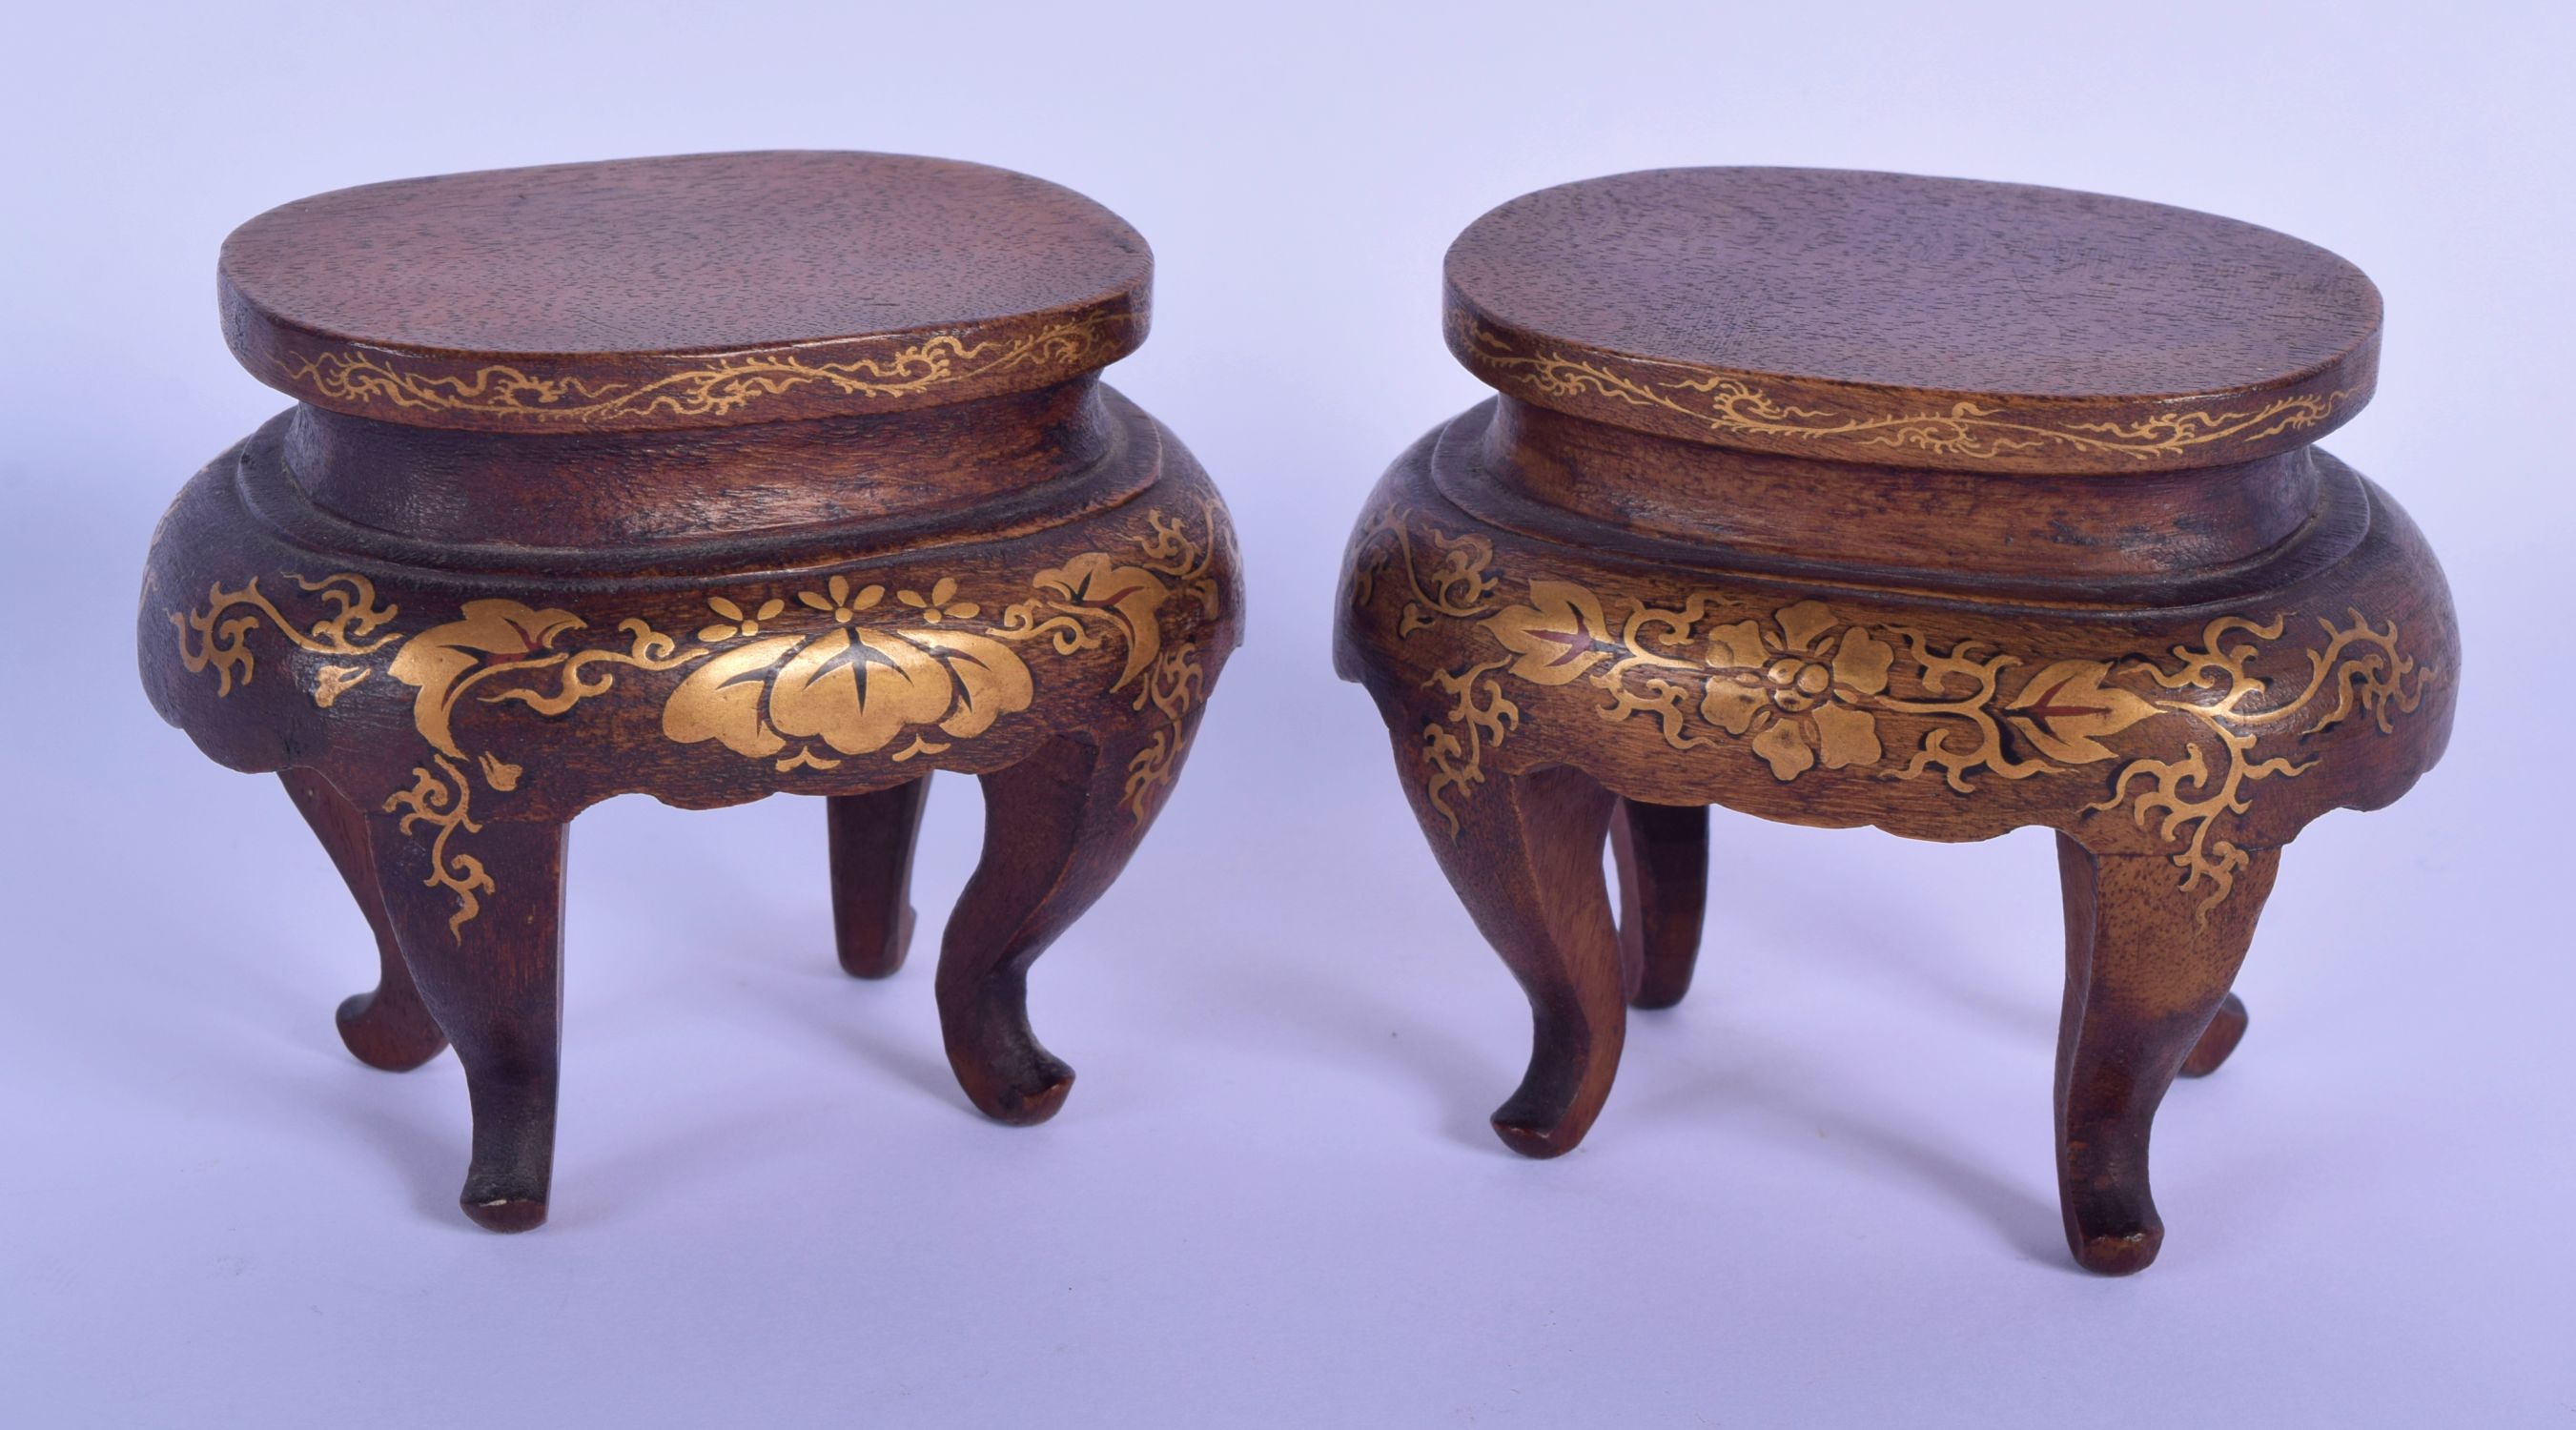 A PAIR OF 19TH CENTURY JAPANESE MEIJI PERIOD GOLD LACQUERED STANDS decorated with foliage. 8 cm x 8 - Image 2 of 4